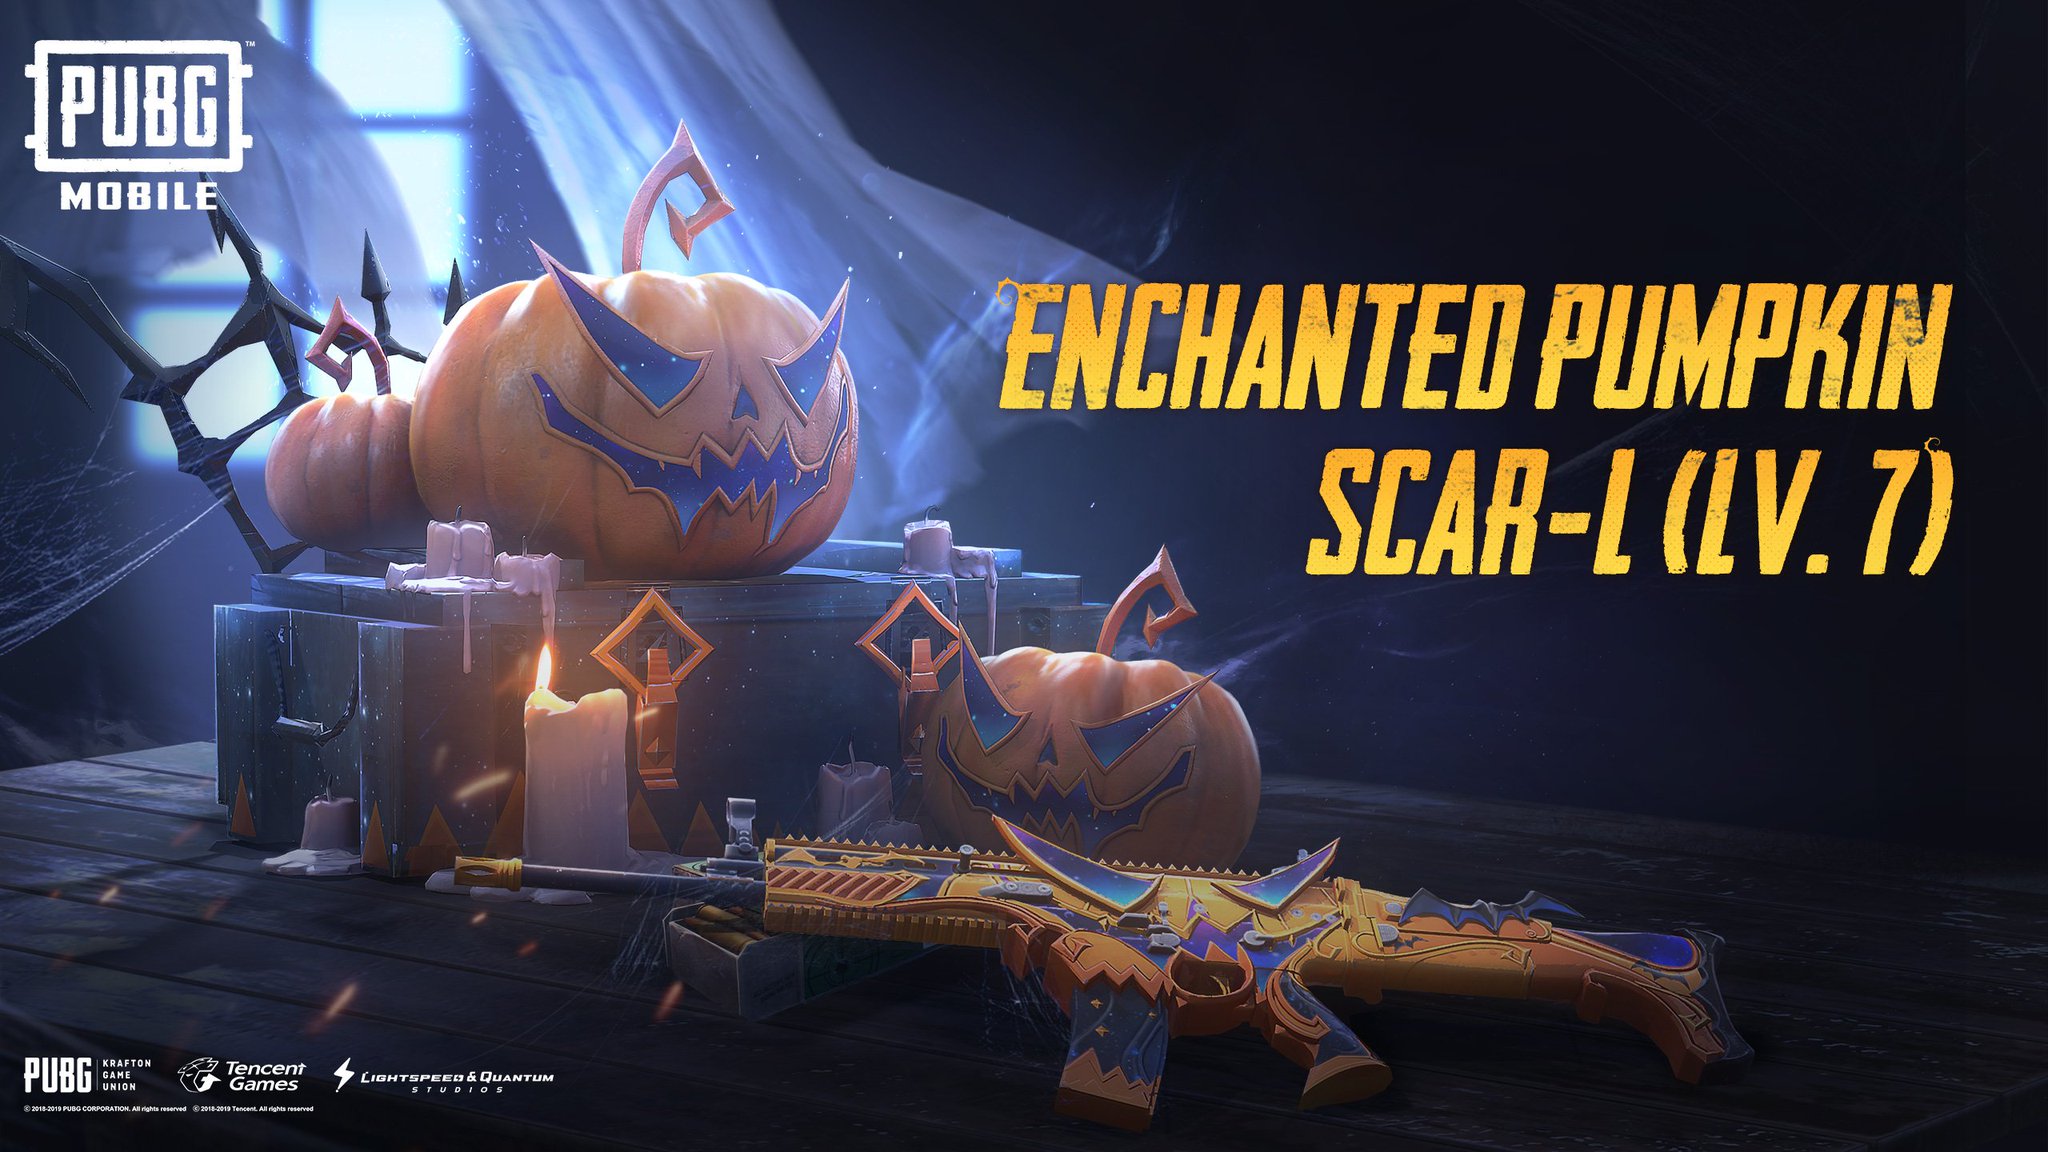 Pubg Mobile Twitterissa Don T Be Scared The Enchanted Pumpkin Scar Available In The Lucky Spin Is Still Available Get It Now And Stay Safe From The Ghouls Ghosts Goblins And Anyone Trying